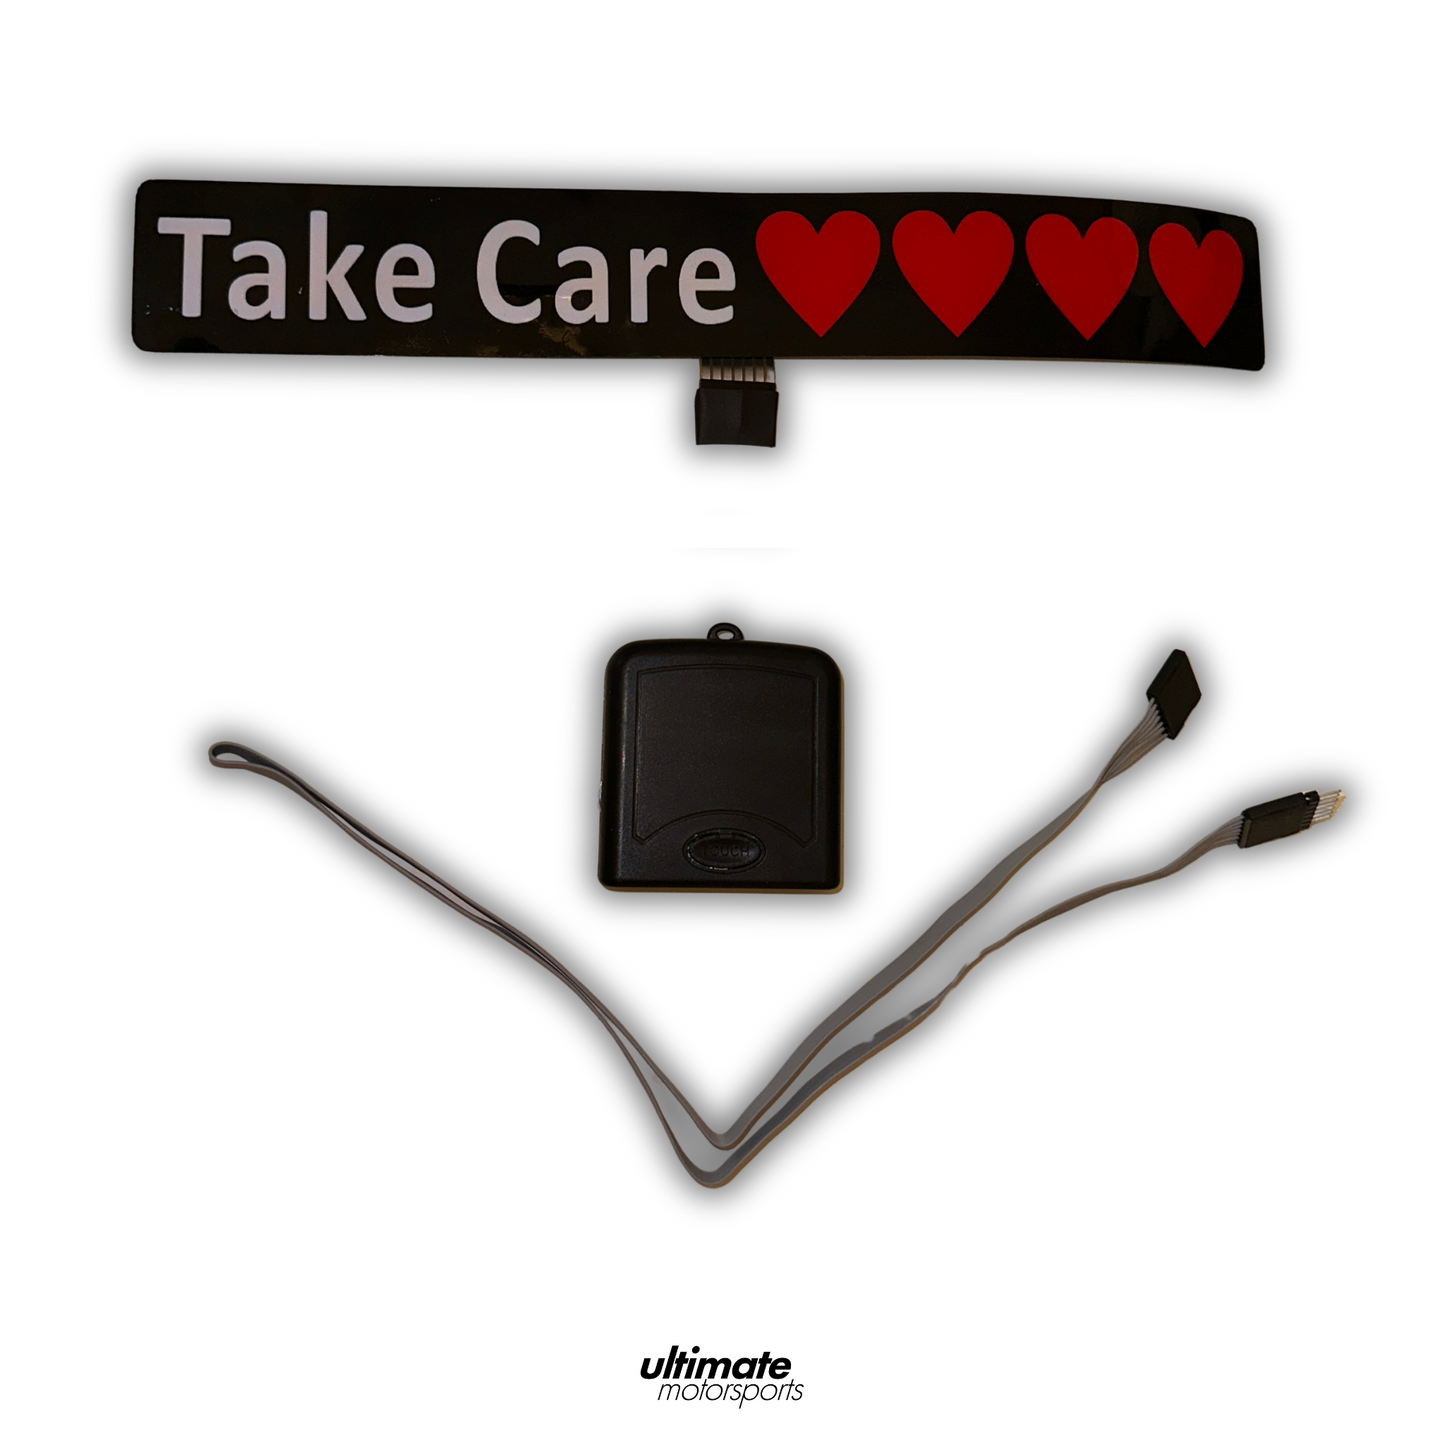 Takecare Heart LED Sticker